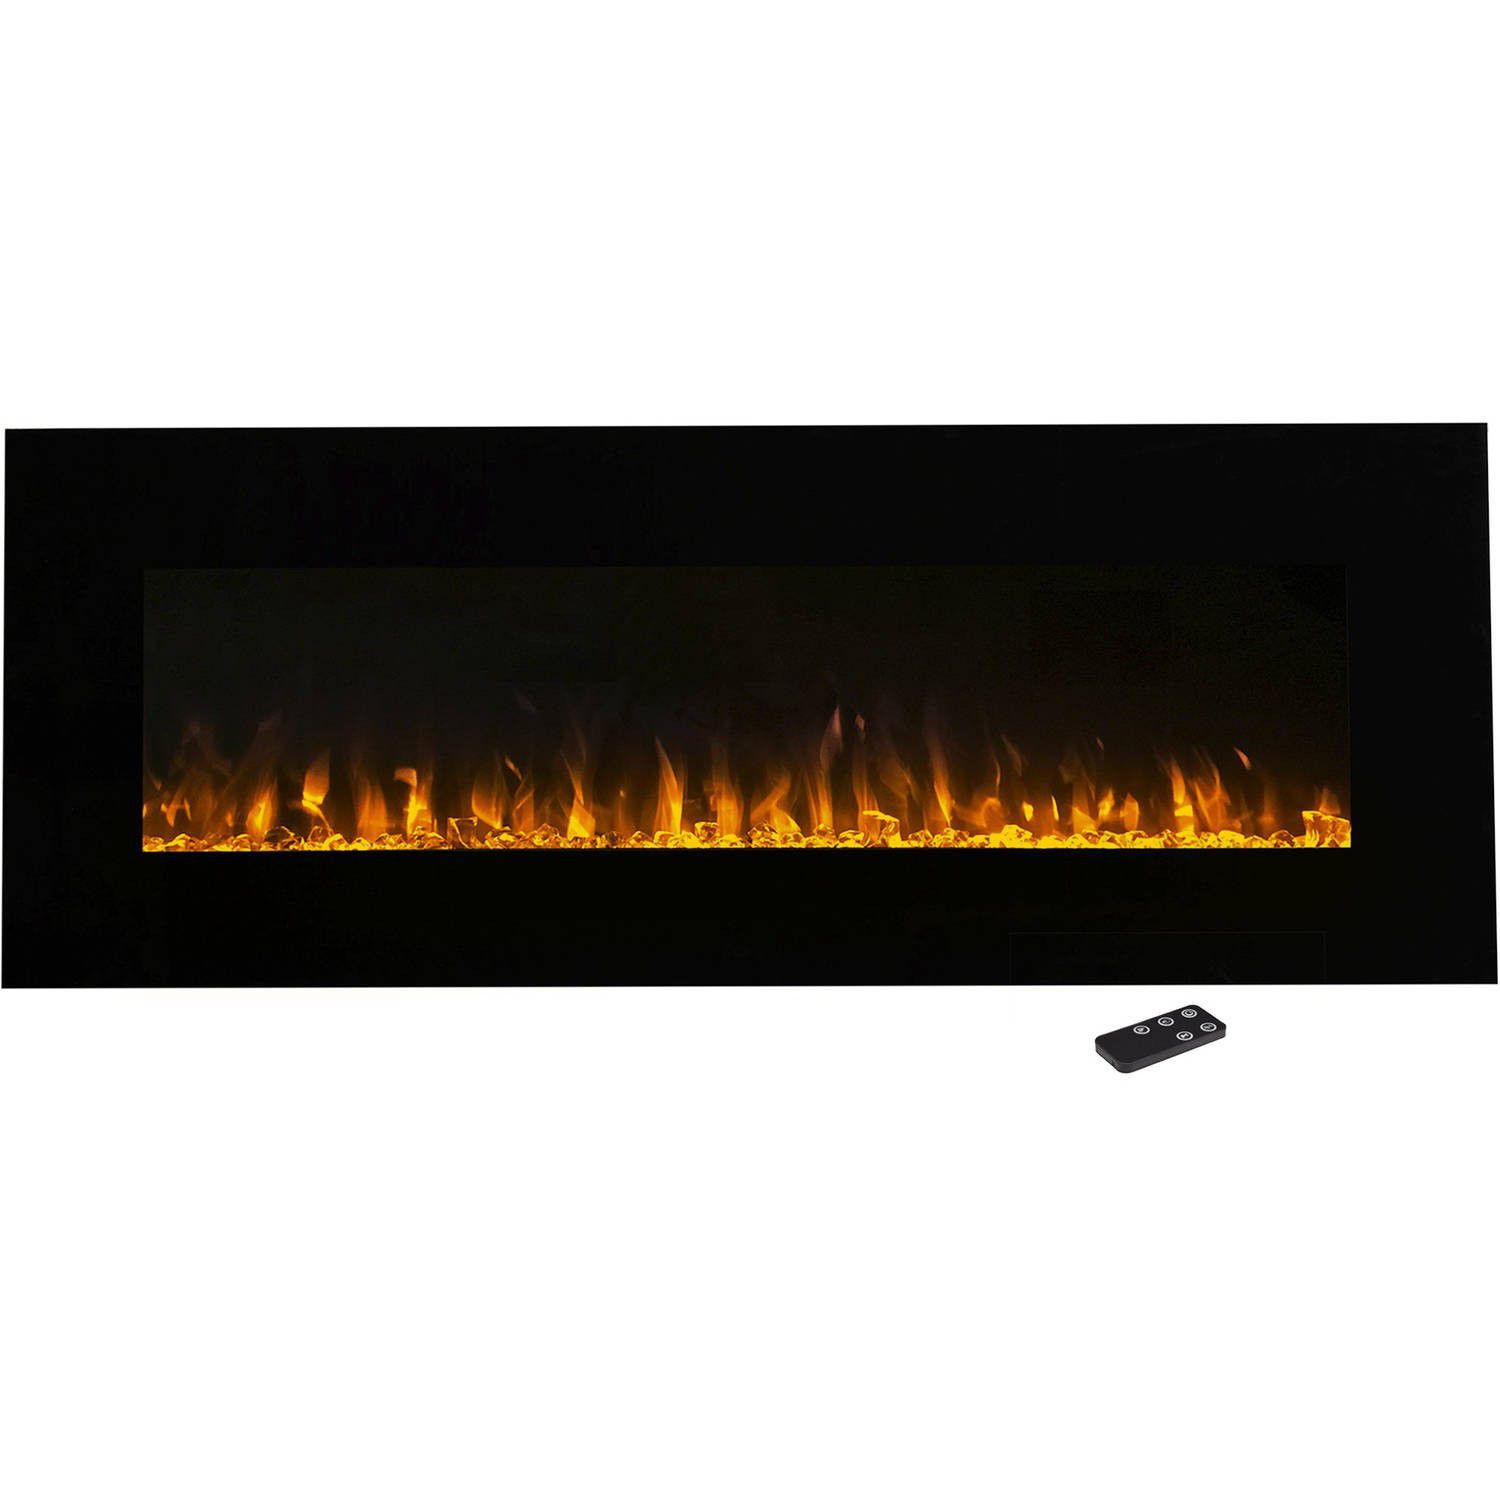 Northwest Wall-mounted 54-inch Electric Fireplace with Remote